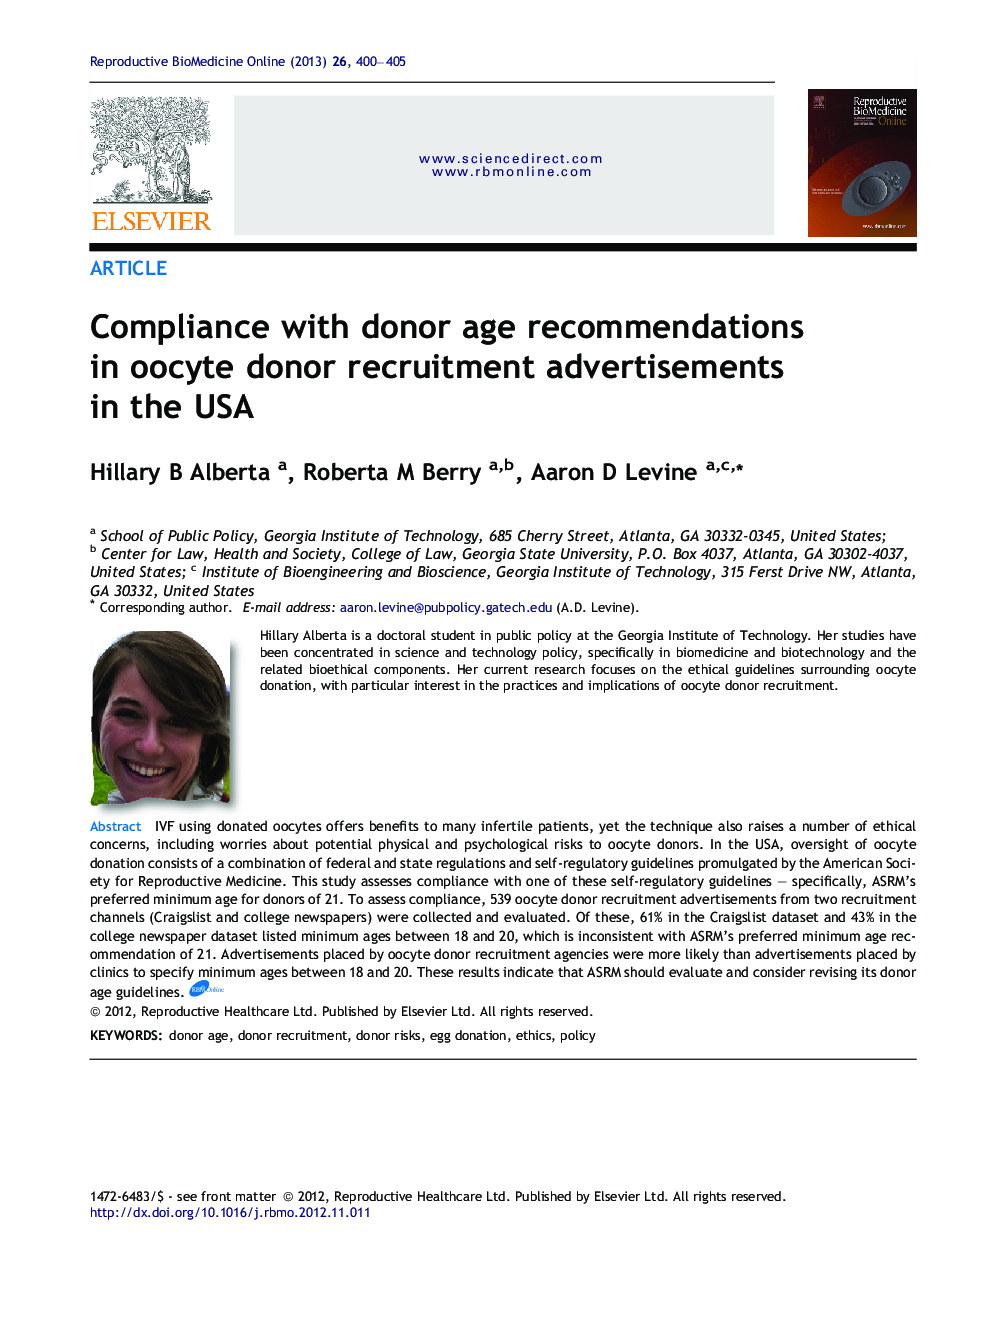 Compliance with donor age recommendations in oocyte donor recruitment advertisements in the USA